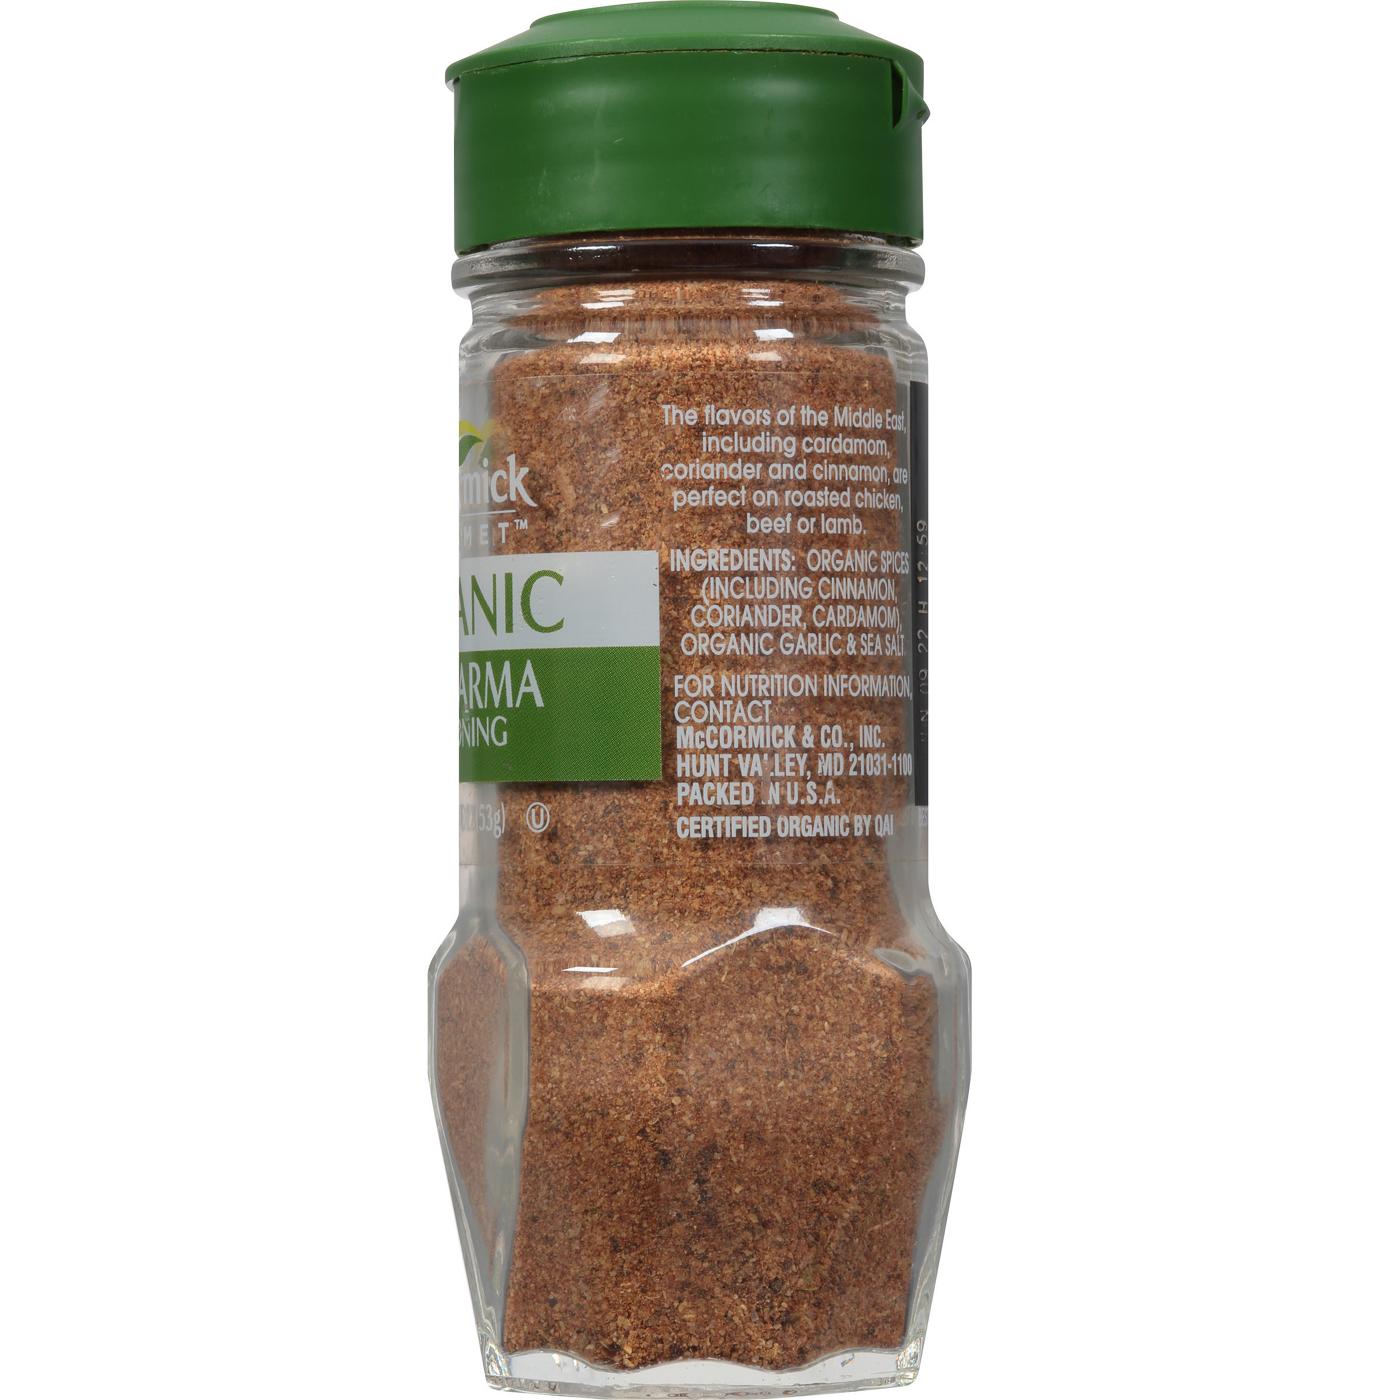 Bragg Organic Sprinkle 24 Herbs & Spices Seasoning - Shop Spice Mixes at  H-E-B